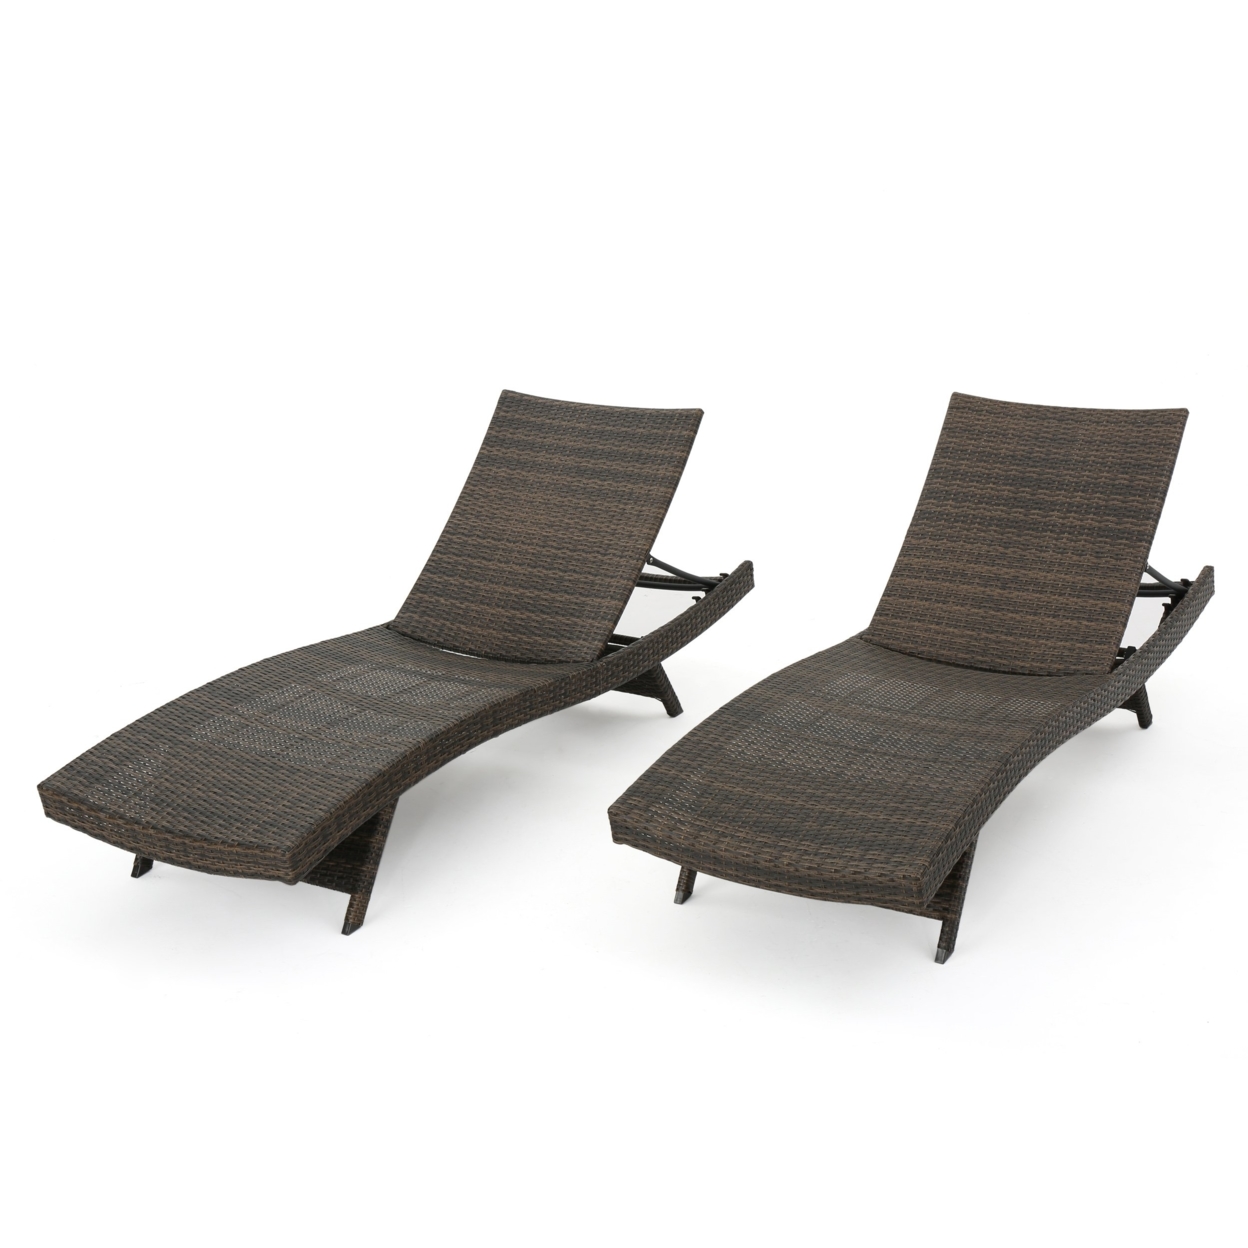 Lakeport Outdoor Mixed Mocha Wicker Armless Chaise Lounge (Set Of 2) - Wicker, Set Of 4